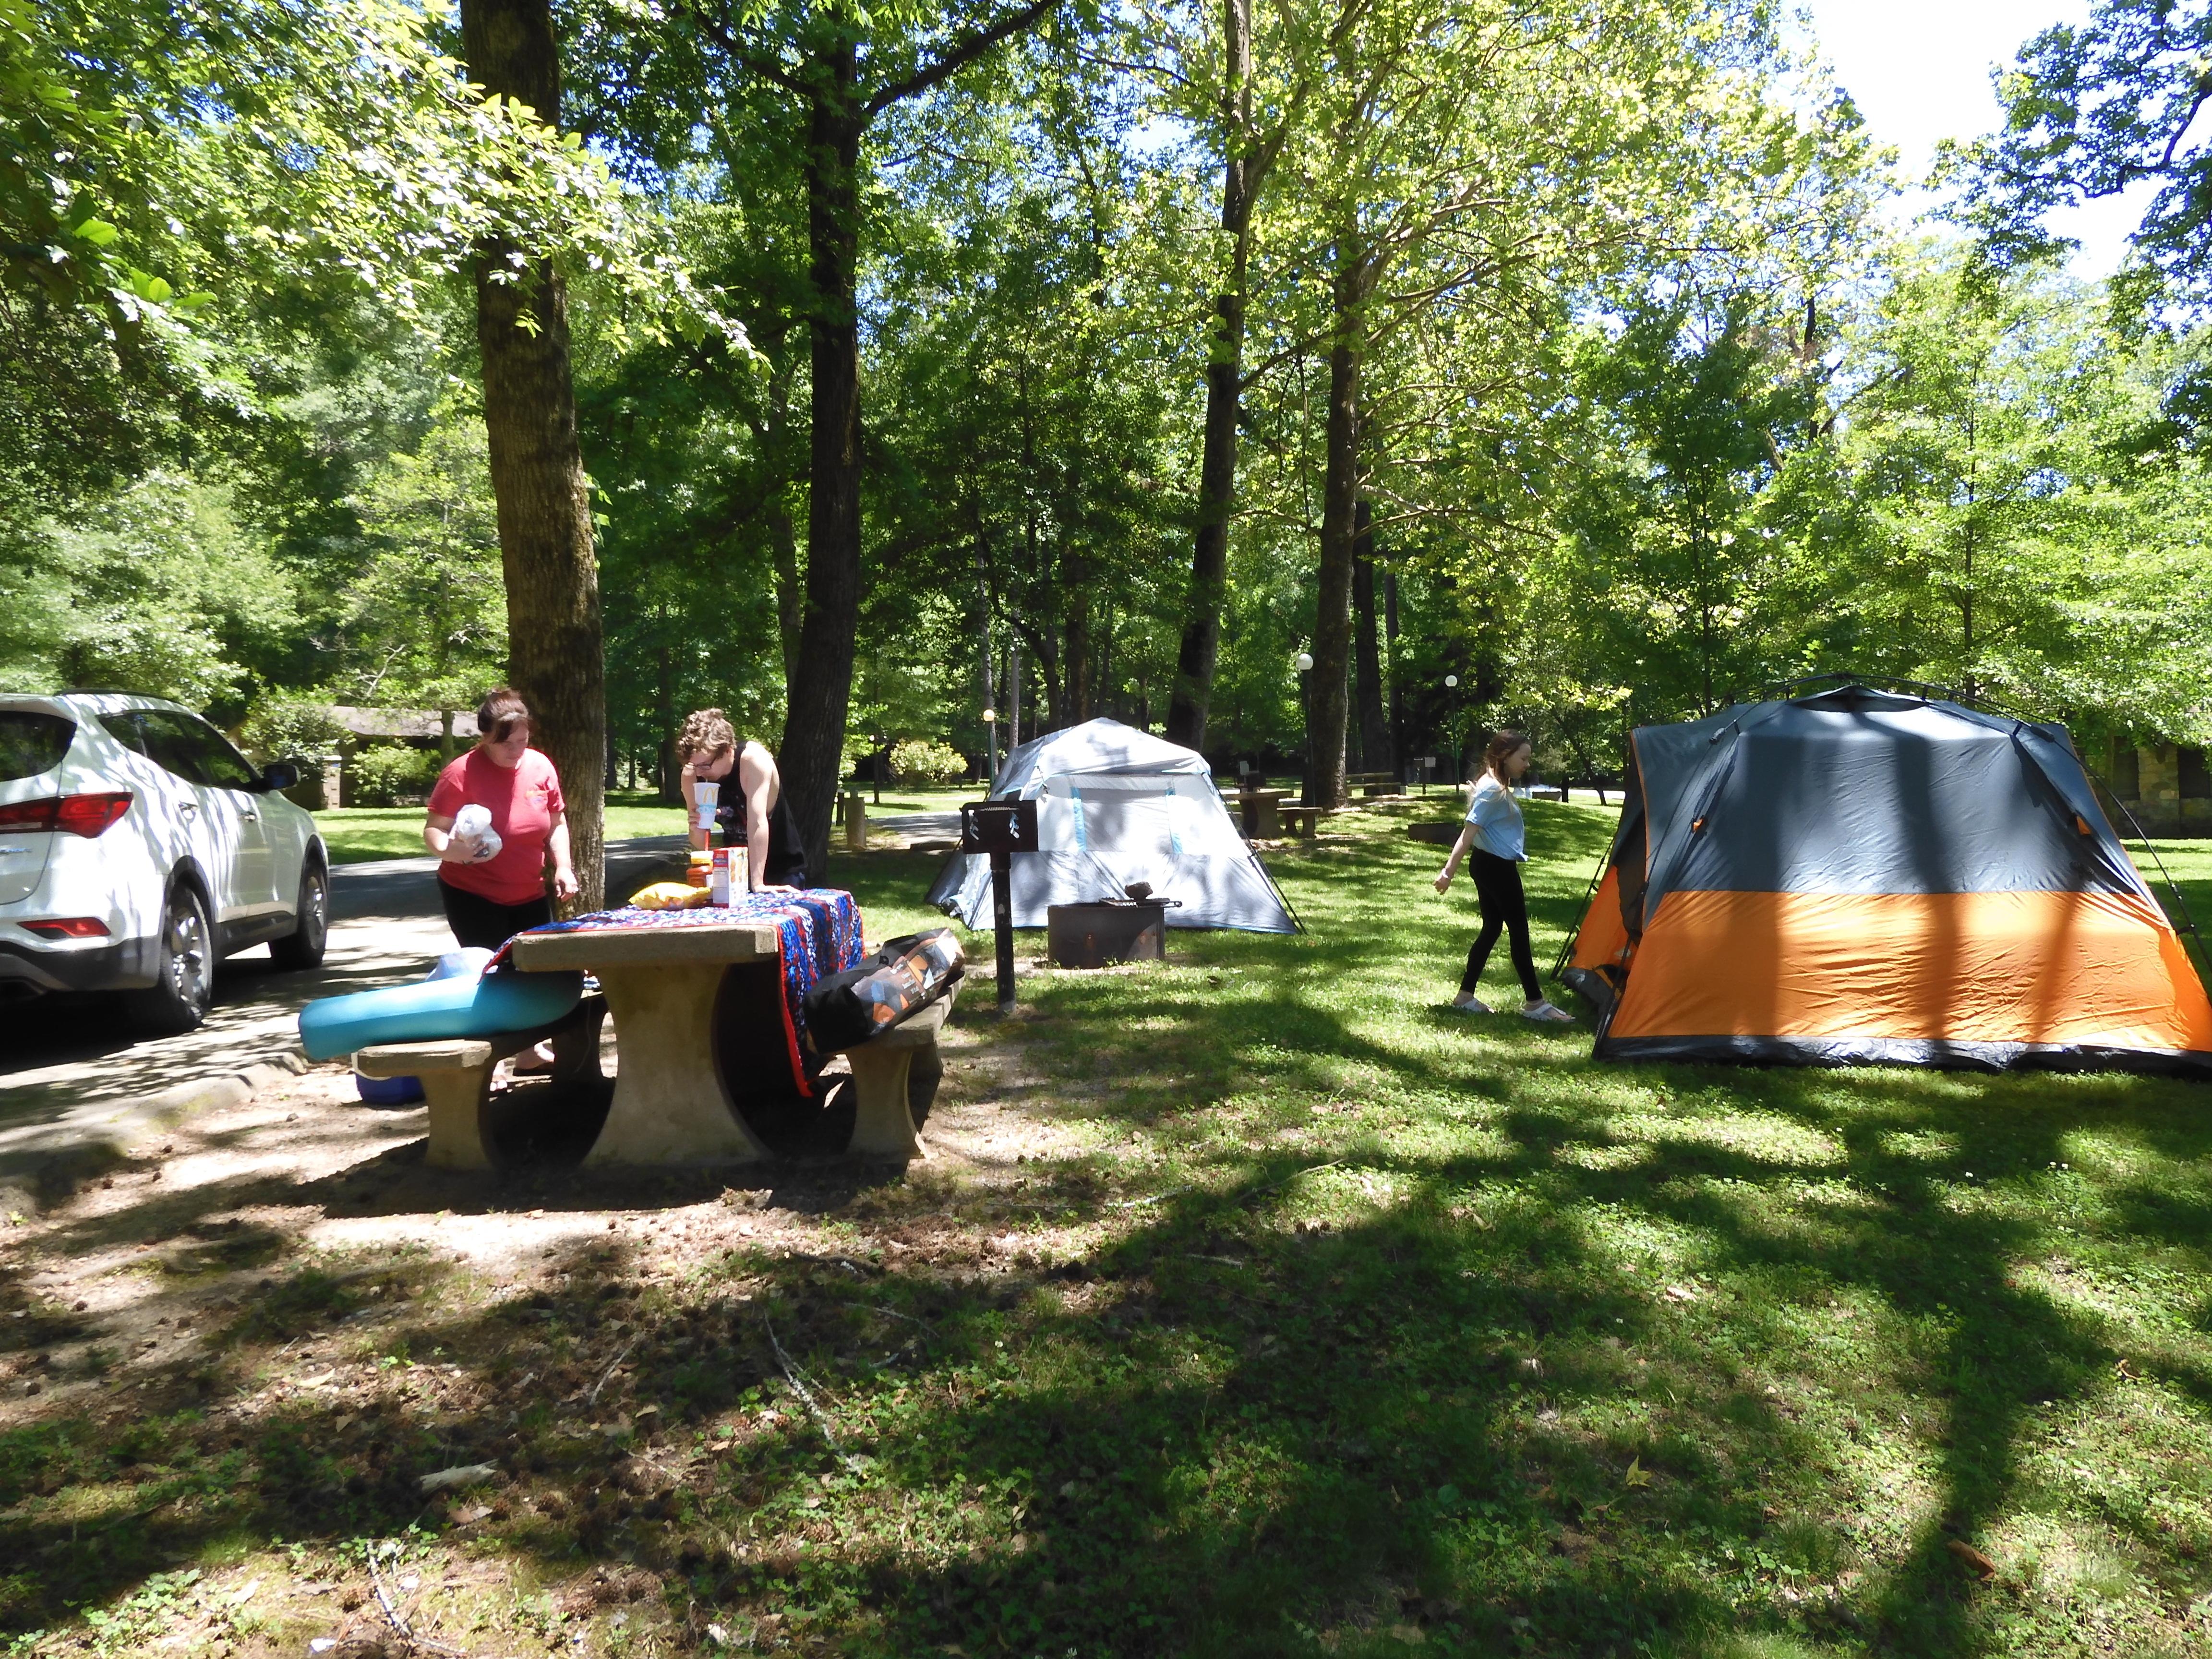 Several colorful tents are set up underneath the canopy of the trees at the campground.